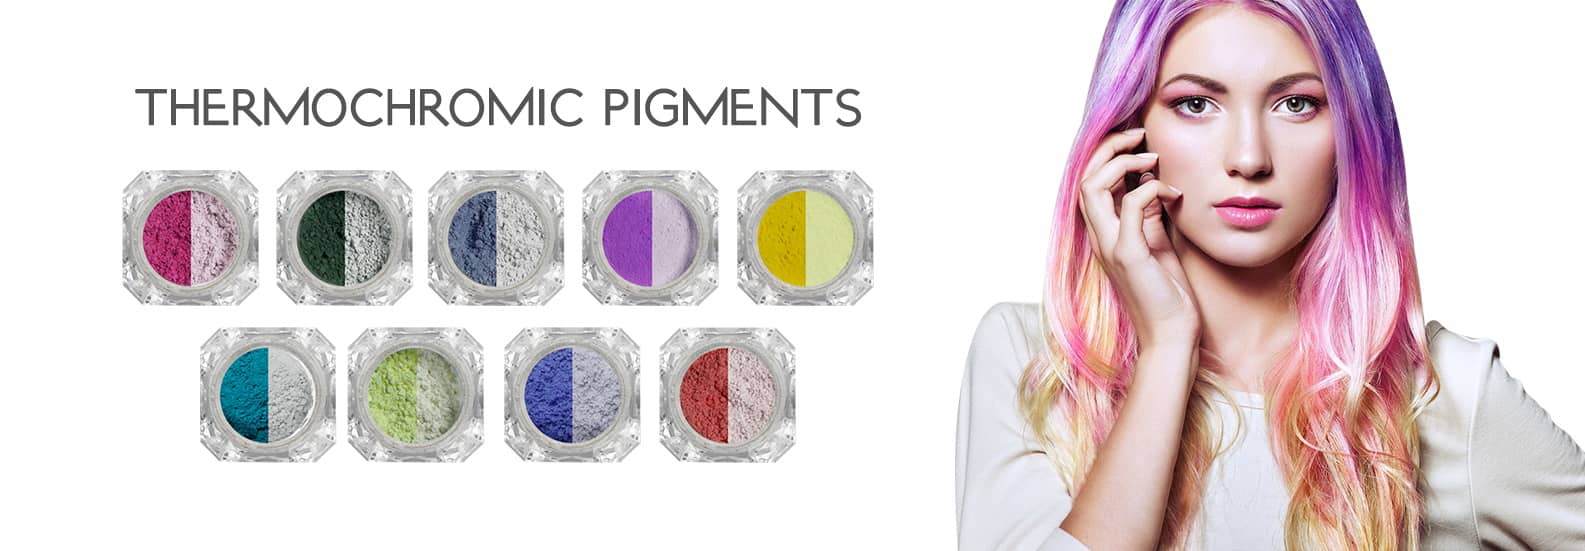 thermochromic_pigments_wholesale